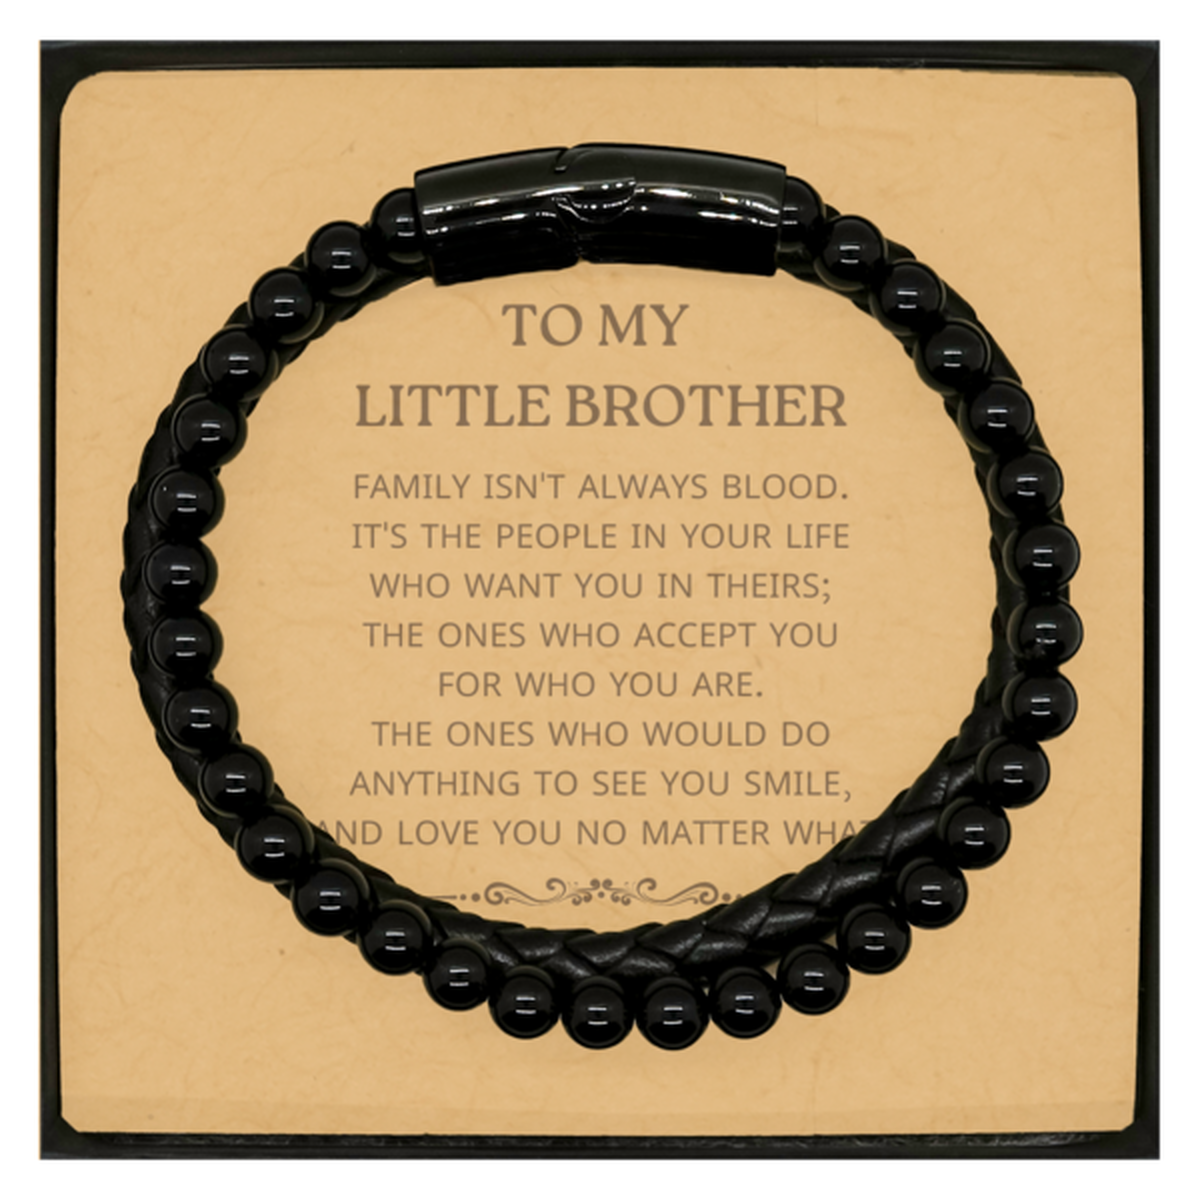 To My Little Brother Gifts, Family isn't always blood, Little Brother Stone Leather Bracelets, Birthday Christmas Unique Present For Little Brother